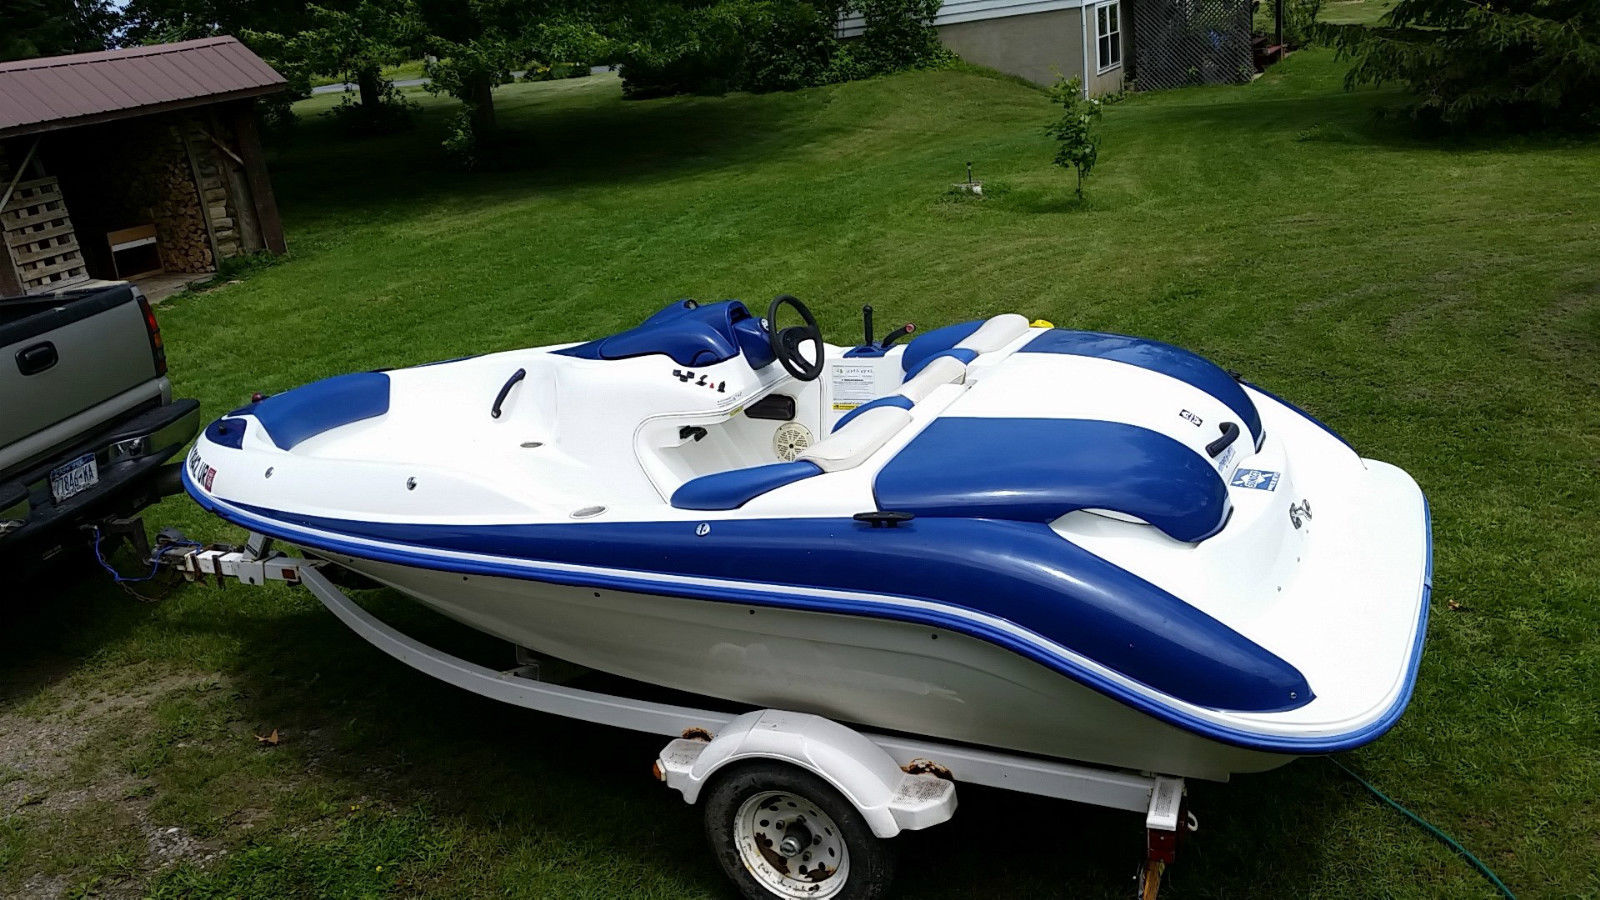 Sea Doo Sportster 14.5 1997 for sale for $2,800 - Boats ...